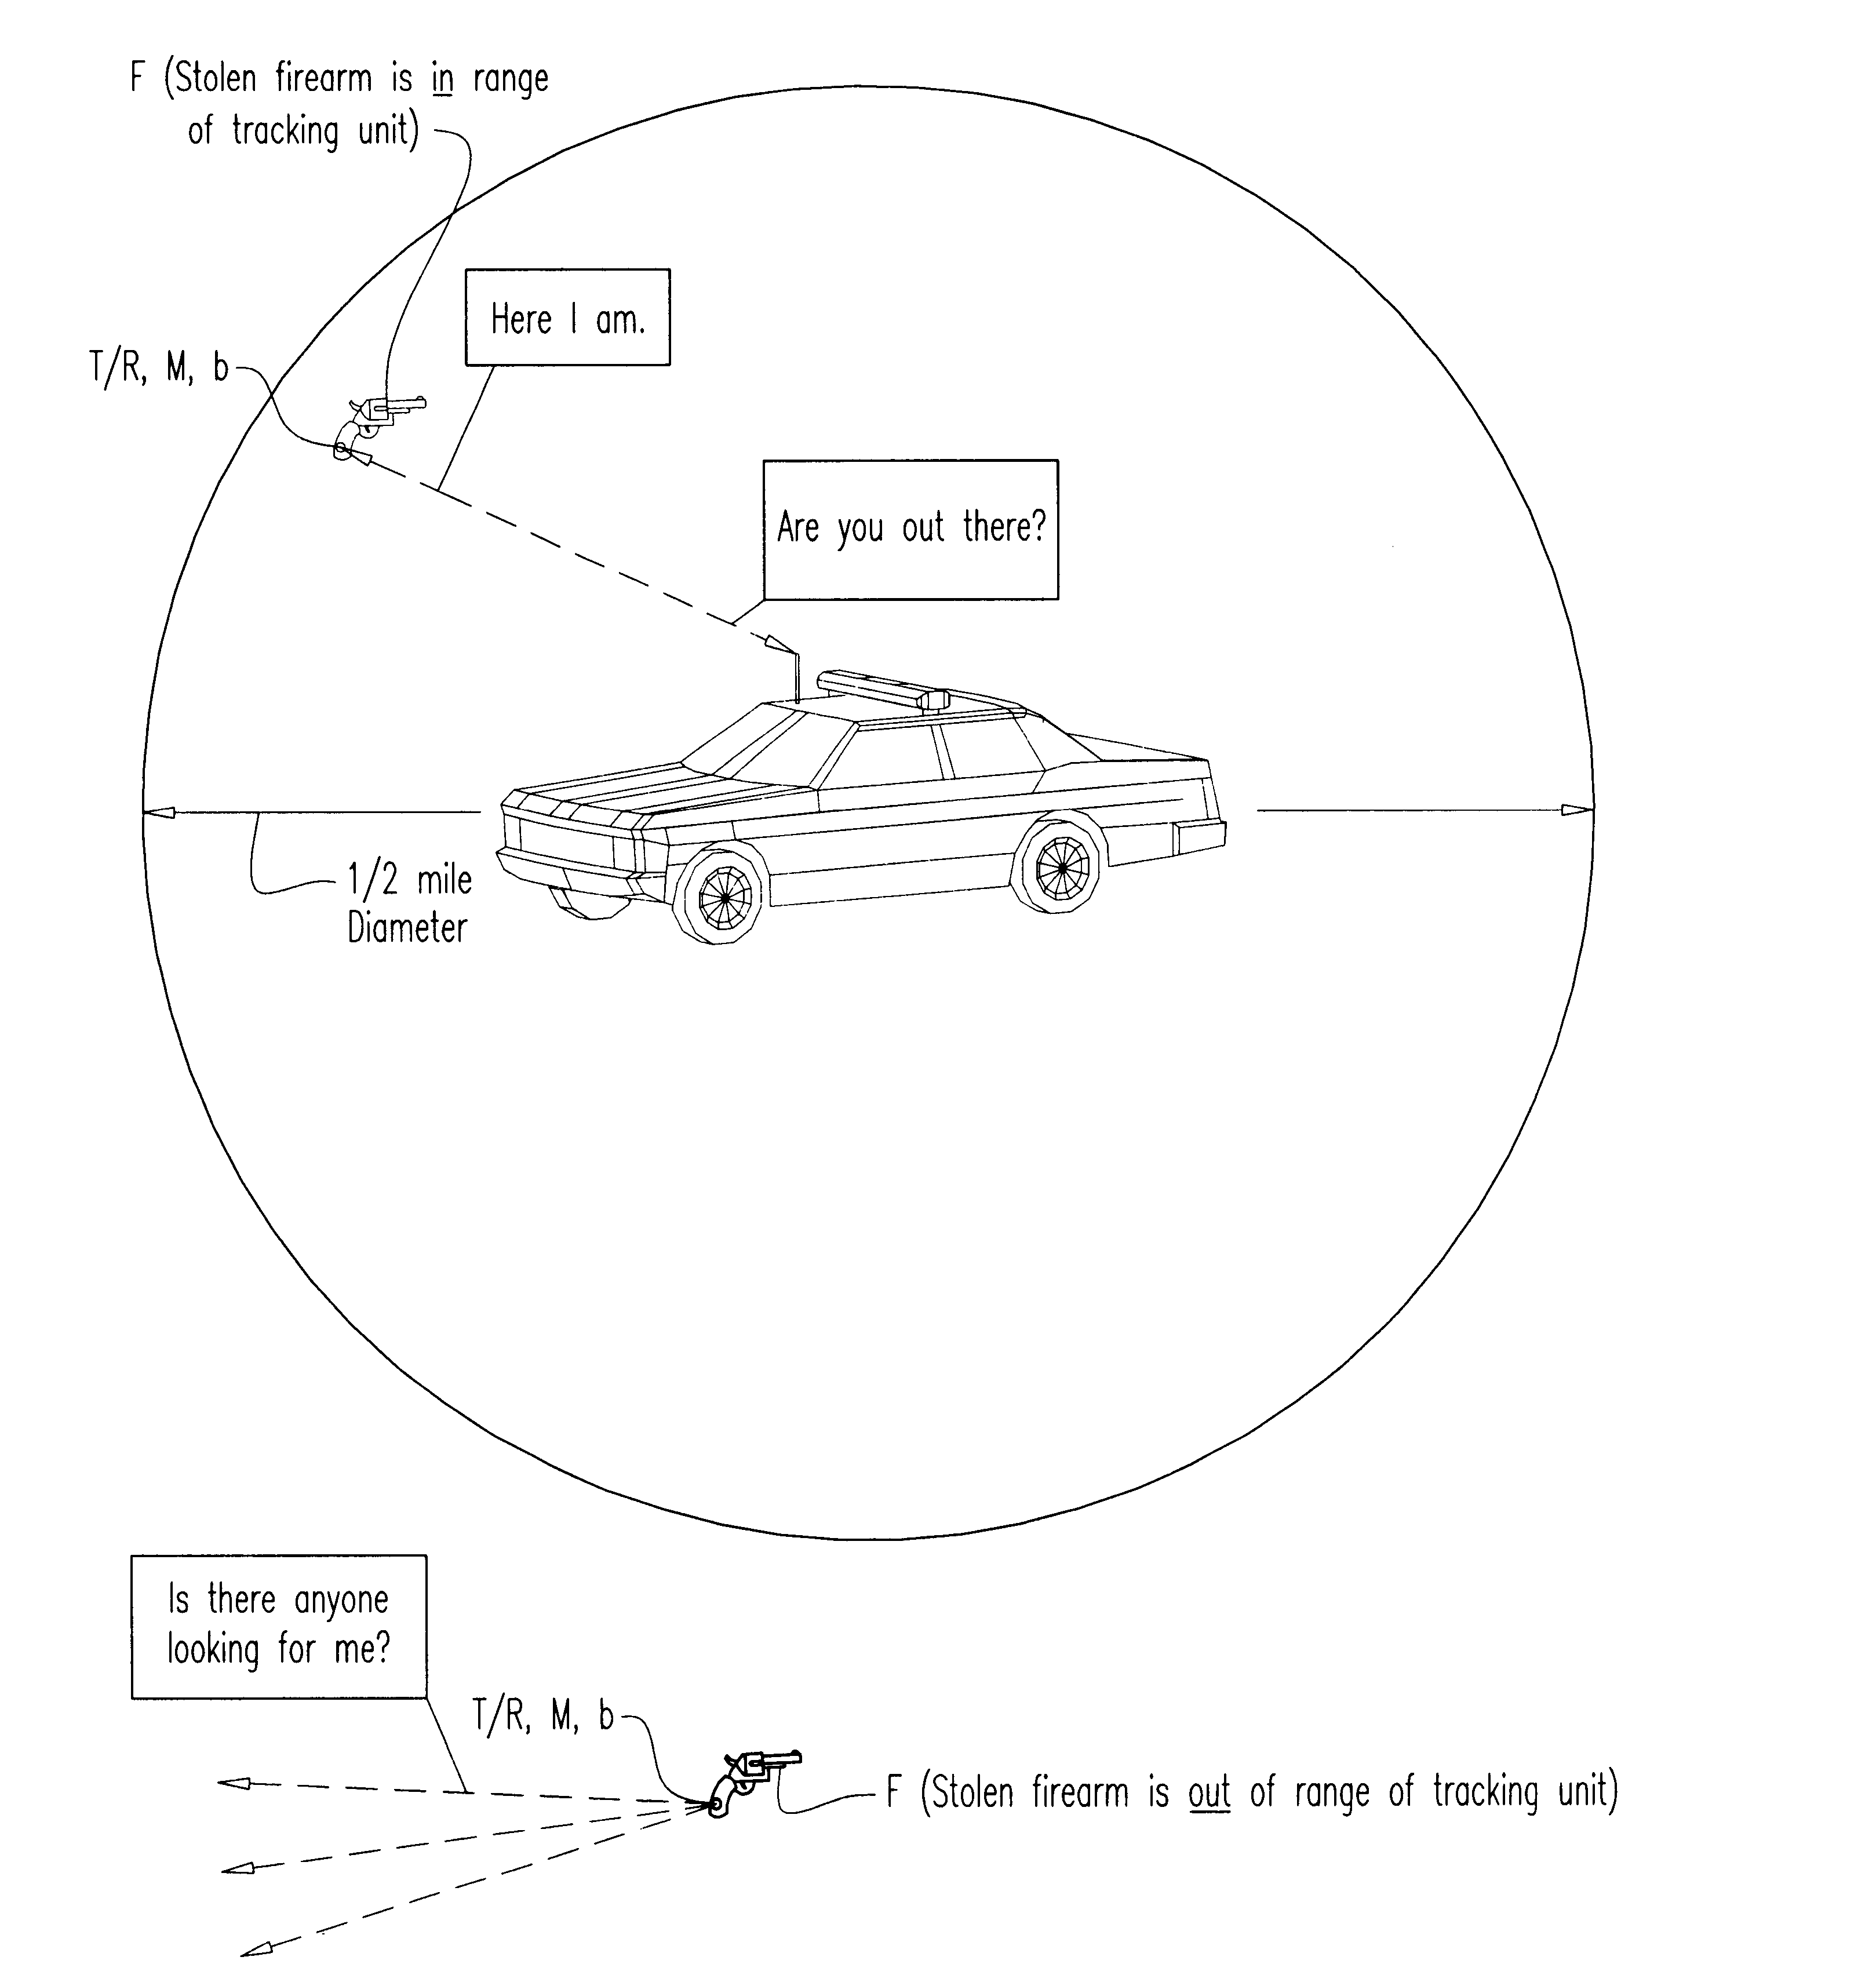 System and method for improving the security of storage of firearms and other objects, and for aiding the recovery of such if removed from storage